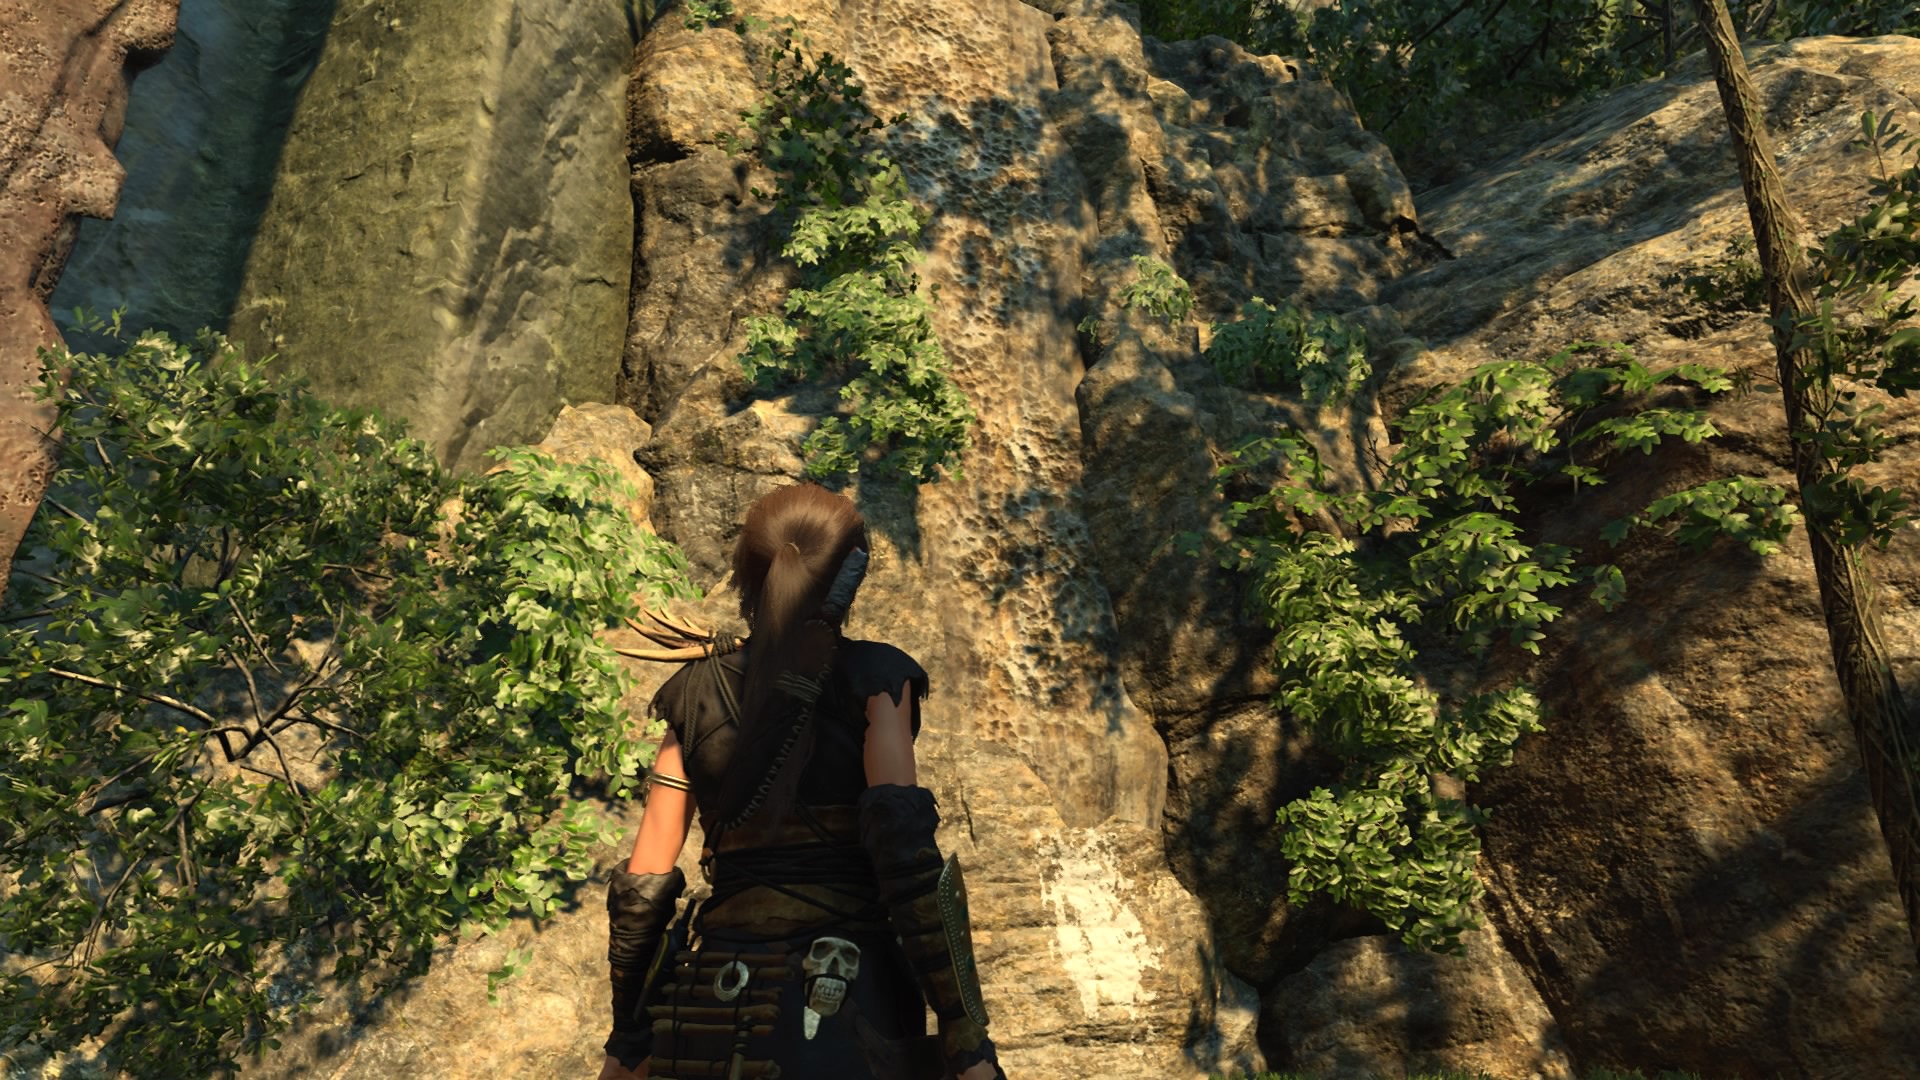 Shadow of the Tomb Raider The Forge